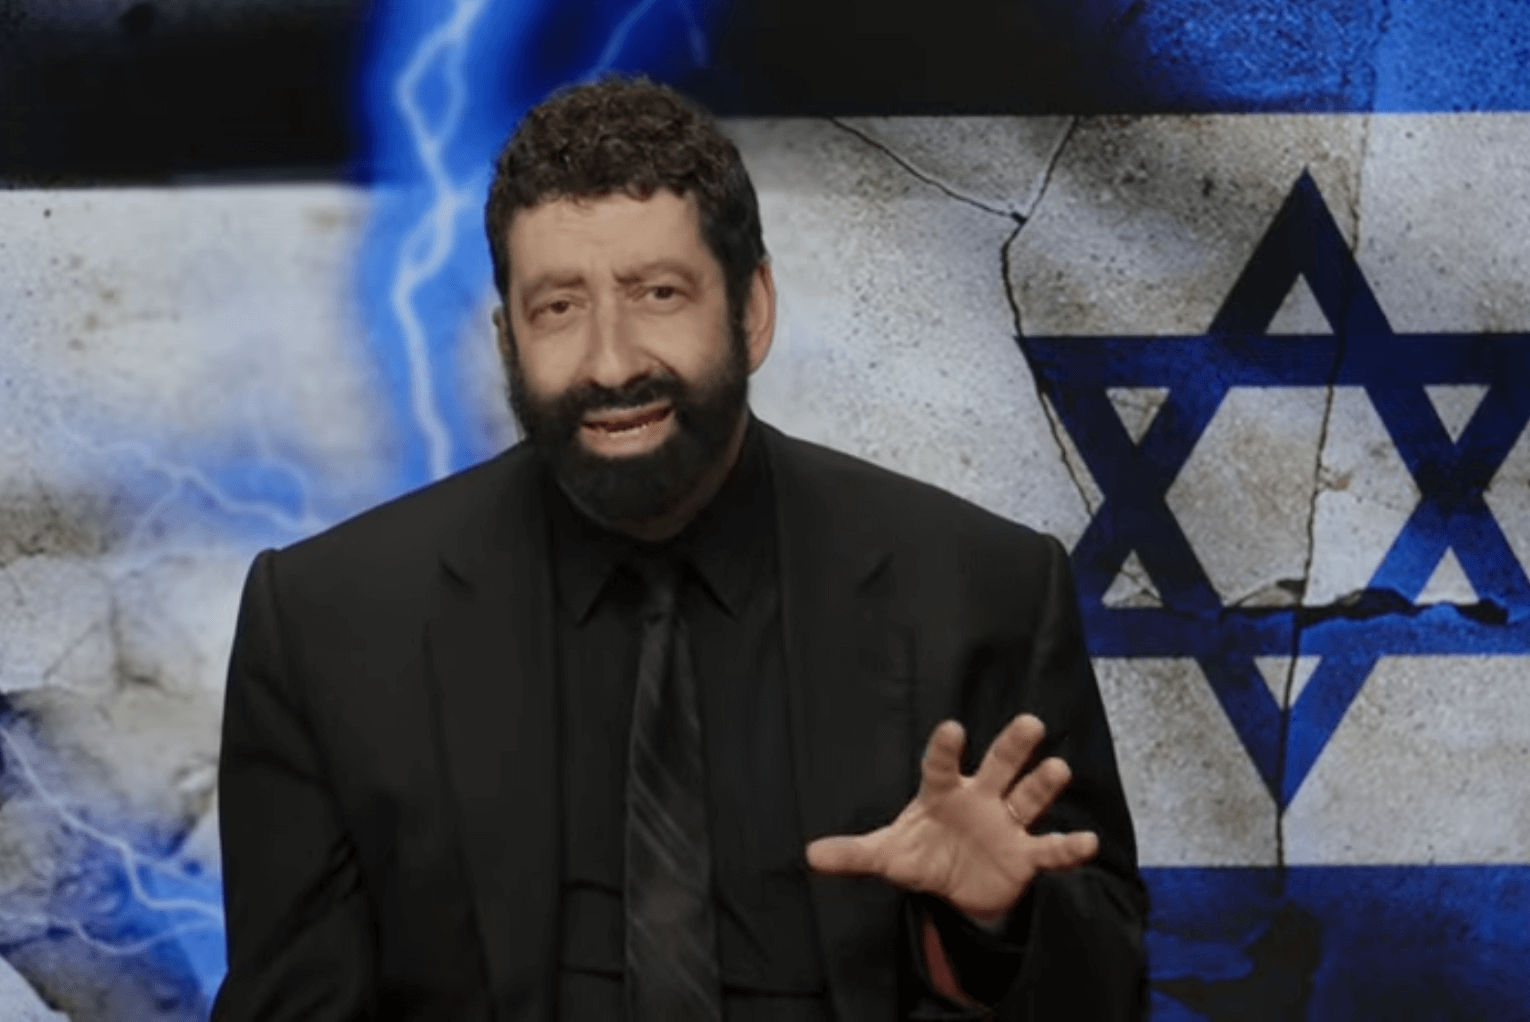 Jonathan Cahn Exposes Force Behind the Protest Phenomenon